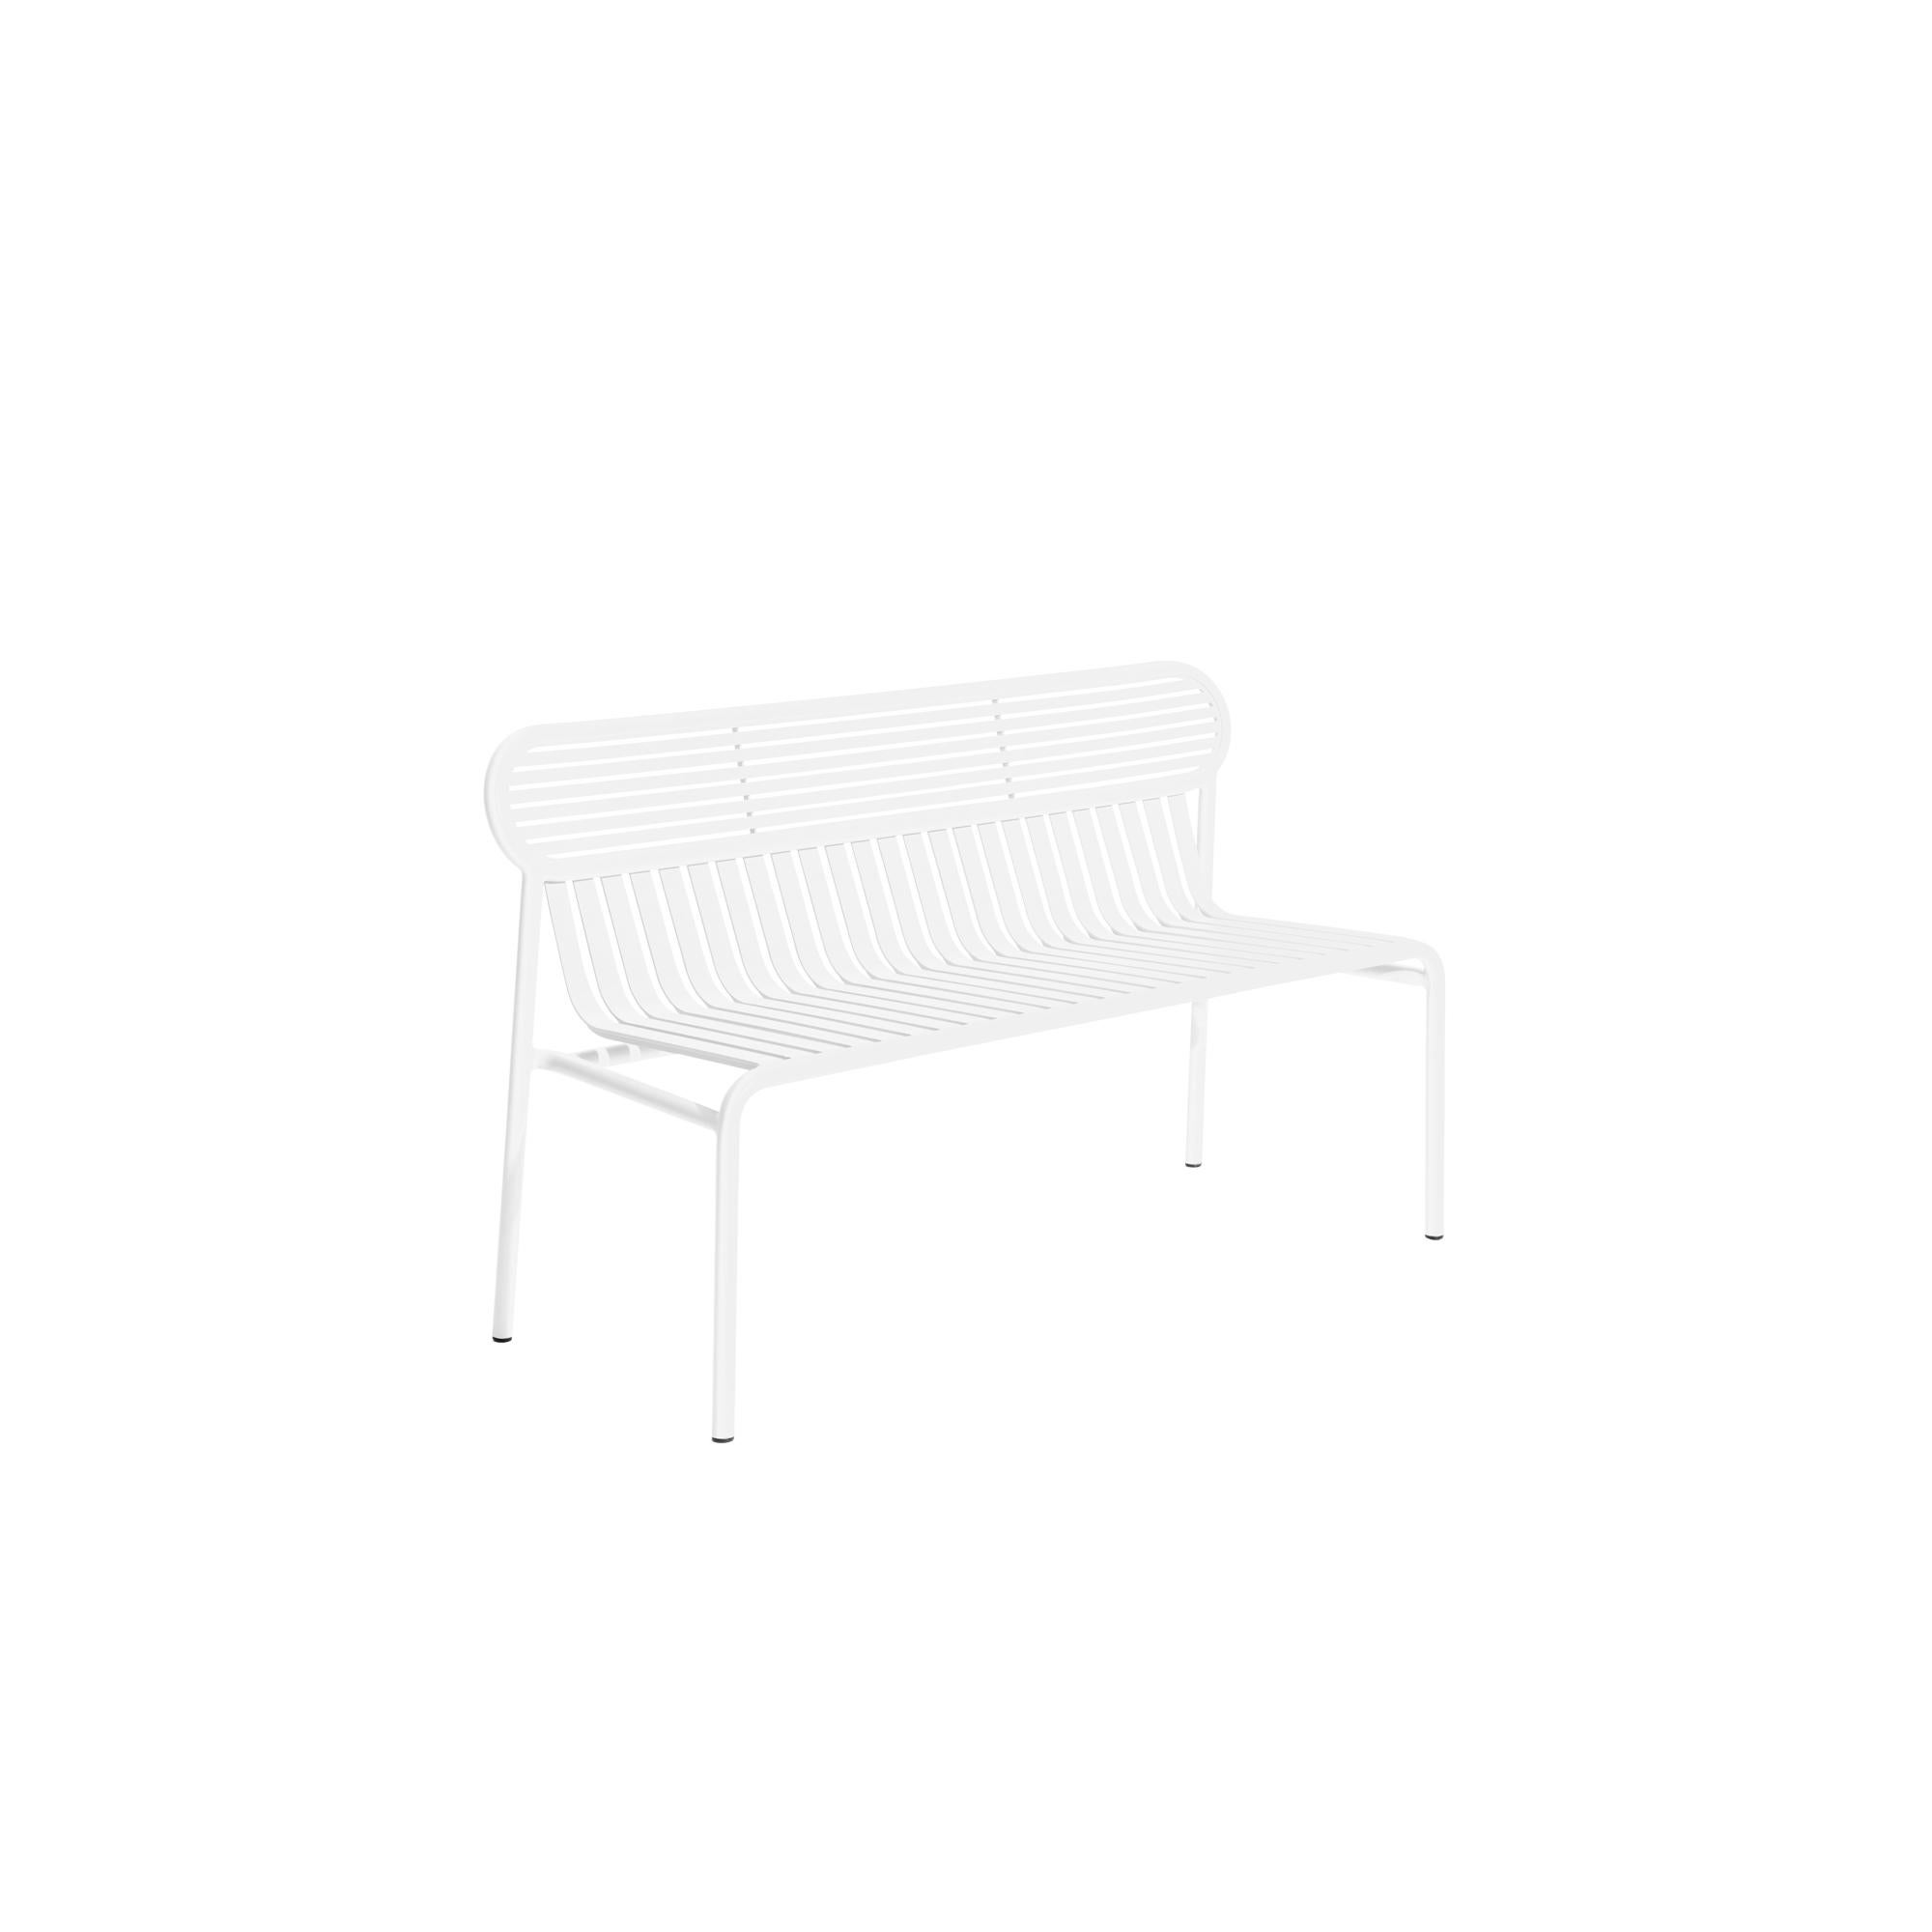 Petite Friture Week-End Bench in White Aluminium by Studio BrichetZiegler, 2017

The week-end collection is a full range of outdoor furniture, in aluminium grained epoxy paint, matt finish, that includes 18 functions and 8 colours for the retail